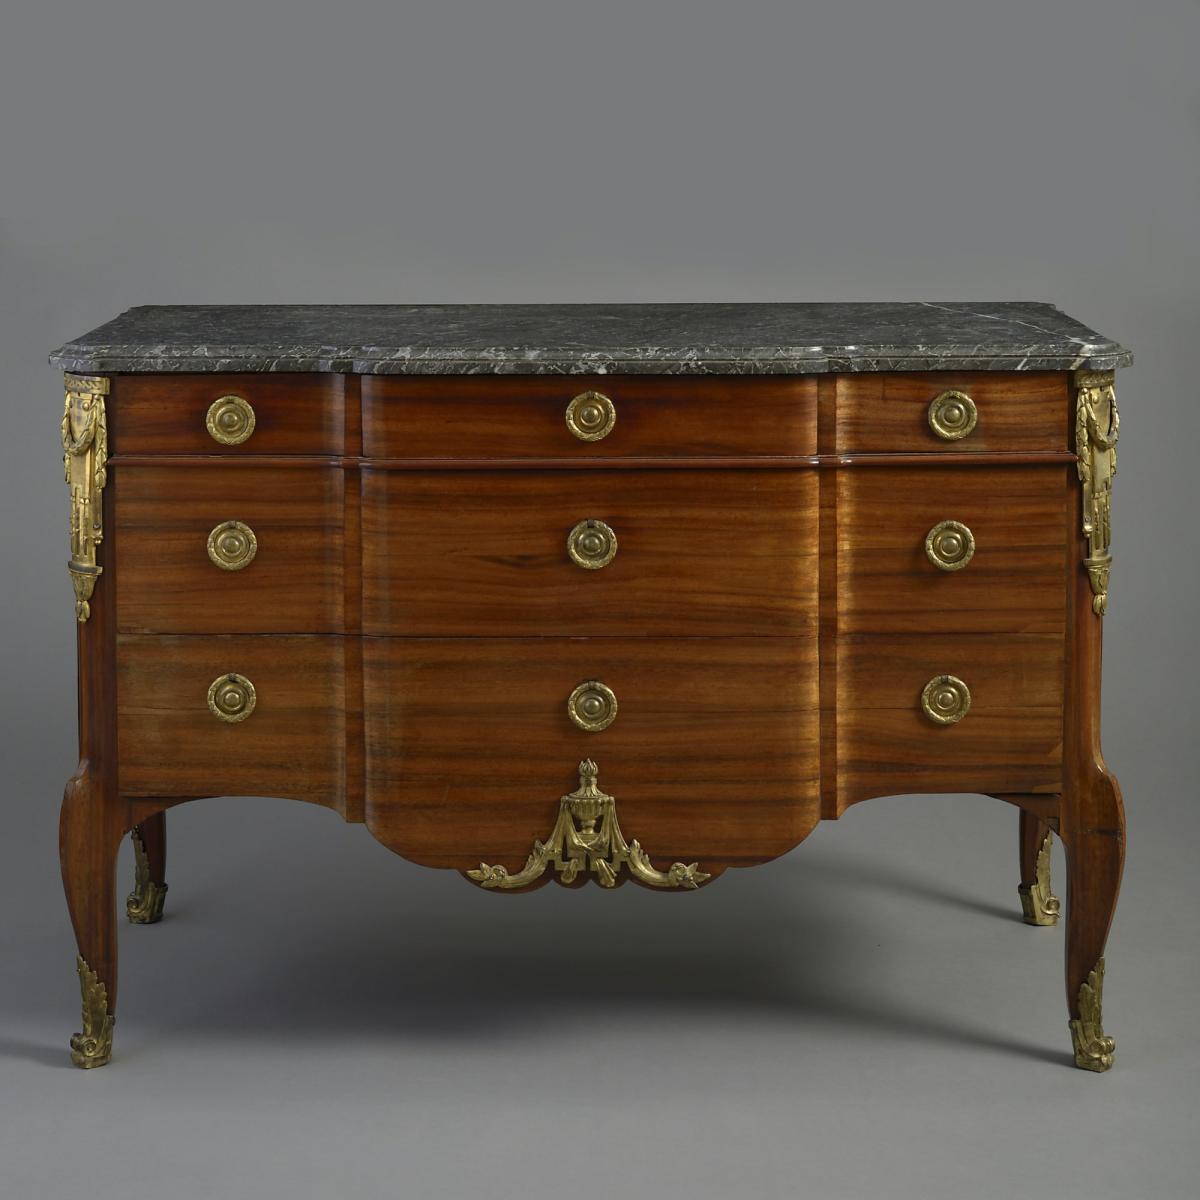 Transitional Commode by Roger van der Cruse Lacroix